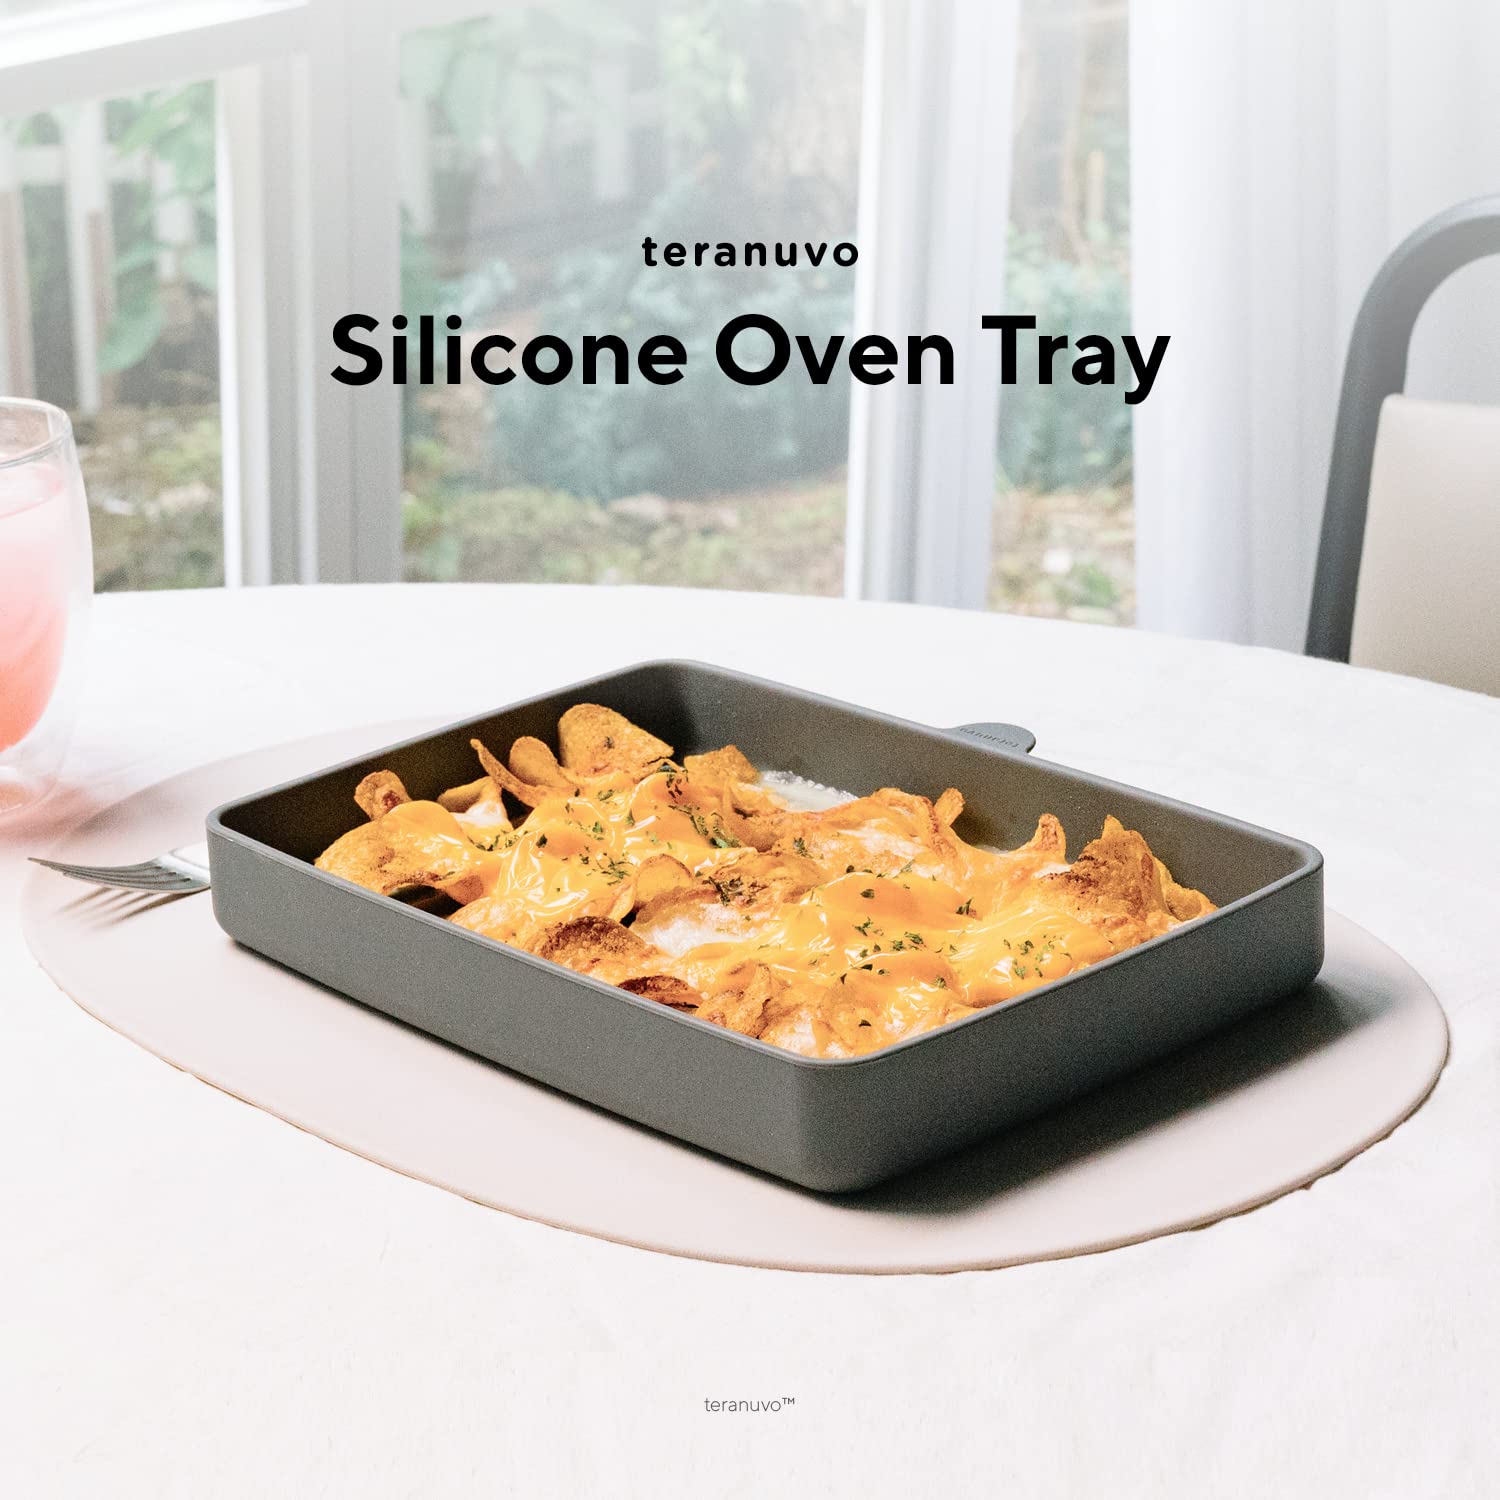 Teranuvo Silicone Oven Tray compatible with BALMUDA The Toaster Oven - safe to use, non toxic, durable, dishwasher safe, heat resistant, silicone liners for air flow and drain oil, non stick (Grey)